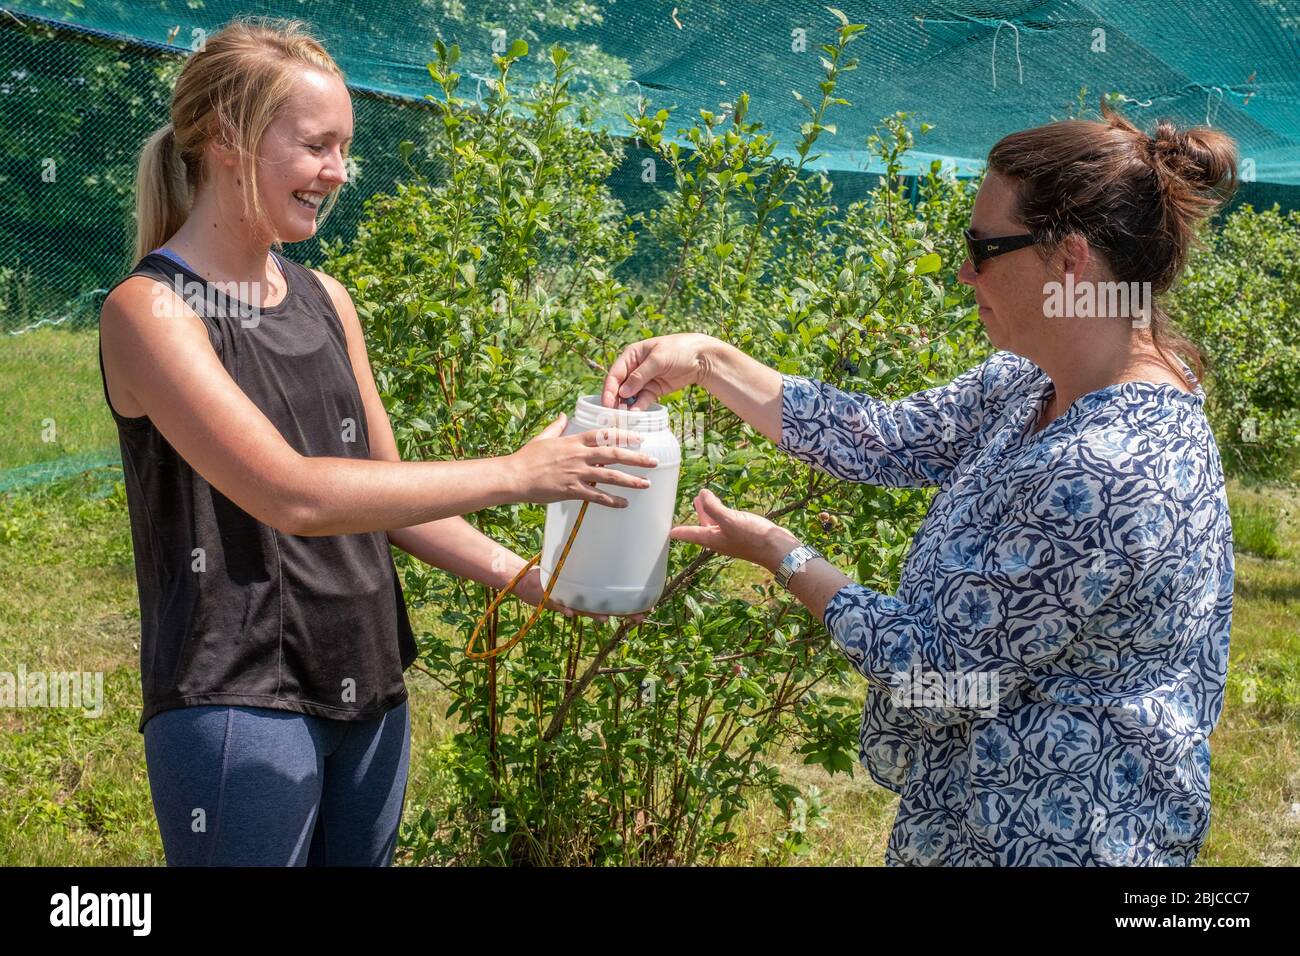 Two women at a large Community farm picking blueberries Stock Photo